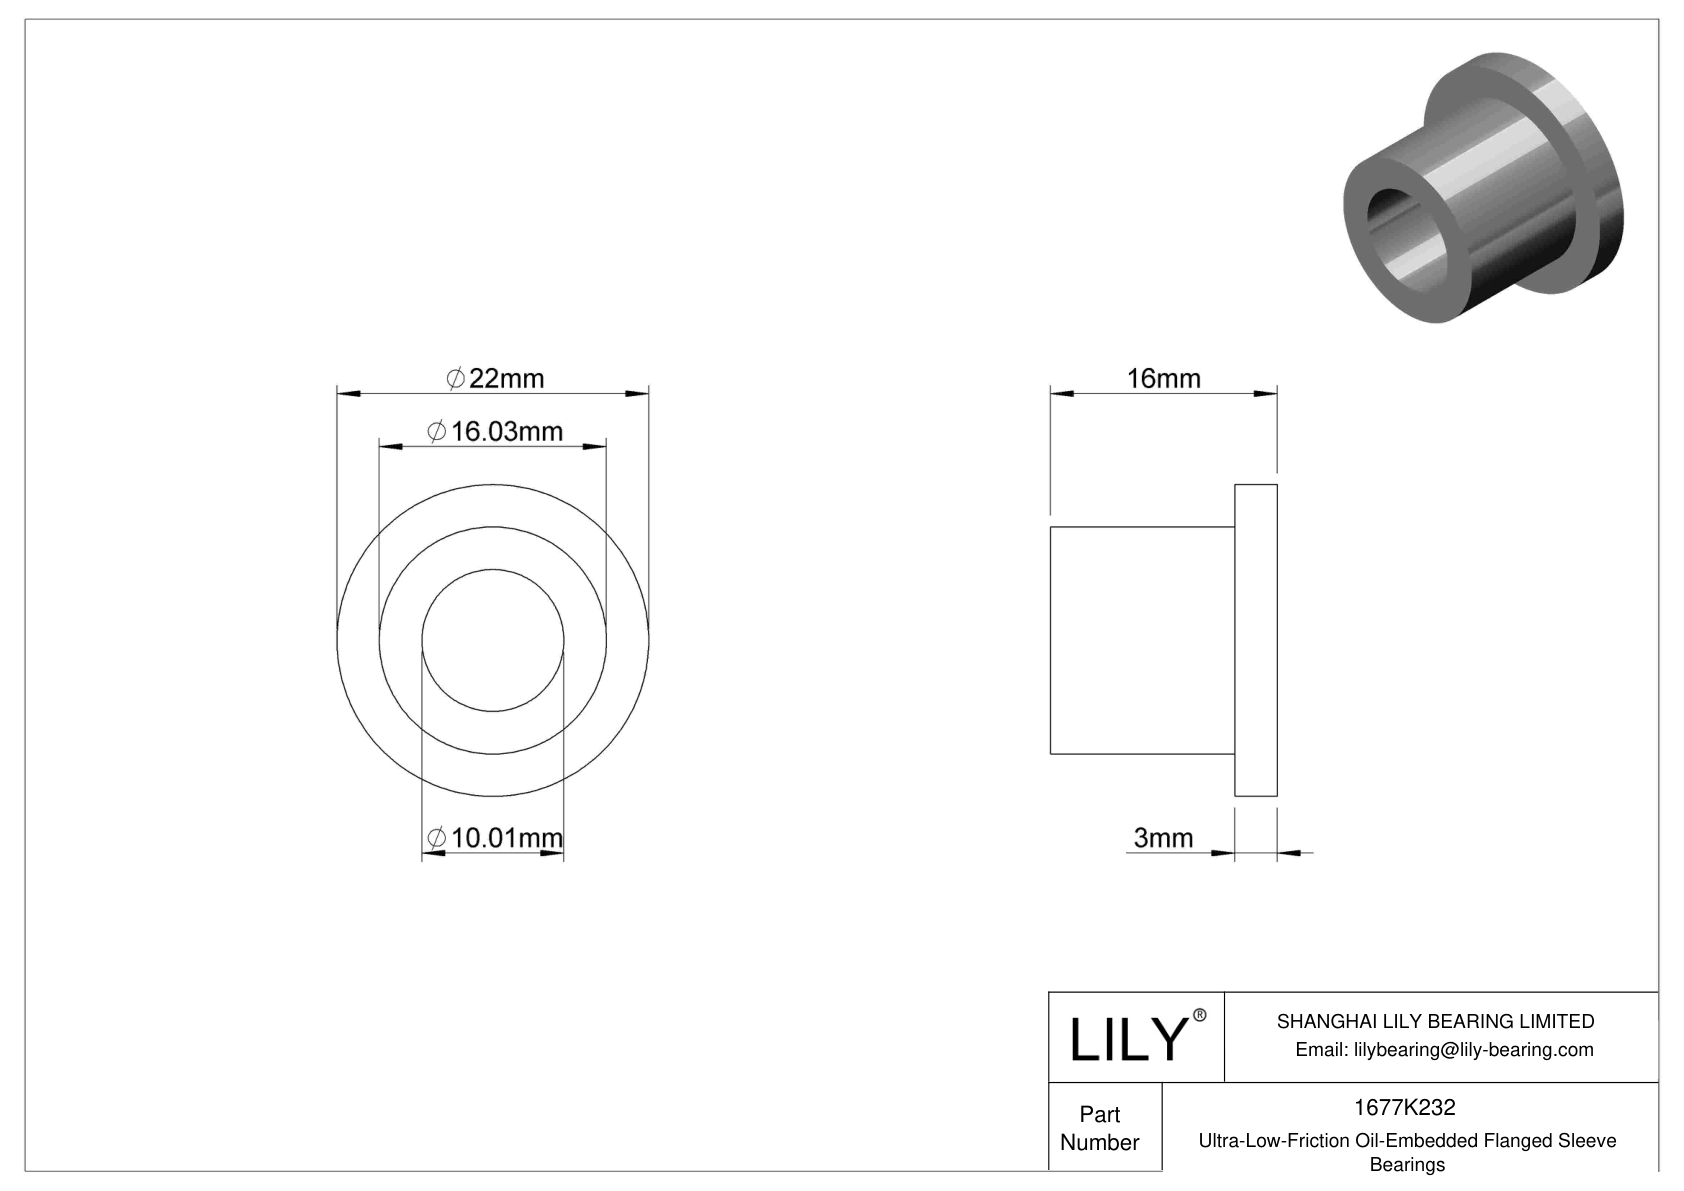 BGHHKCDC Ultra-Low-Friction Oil-Embedded Flanged Sleeve Bearings cad drawing